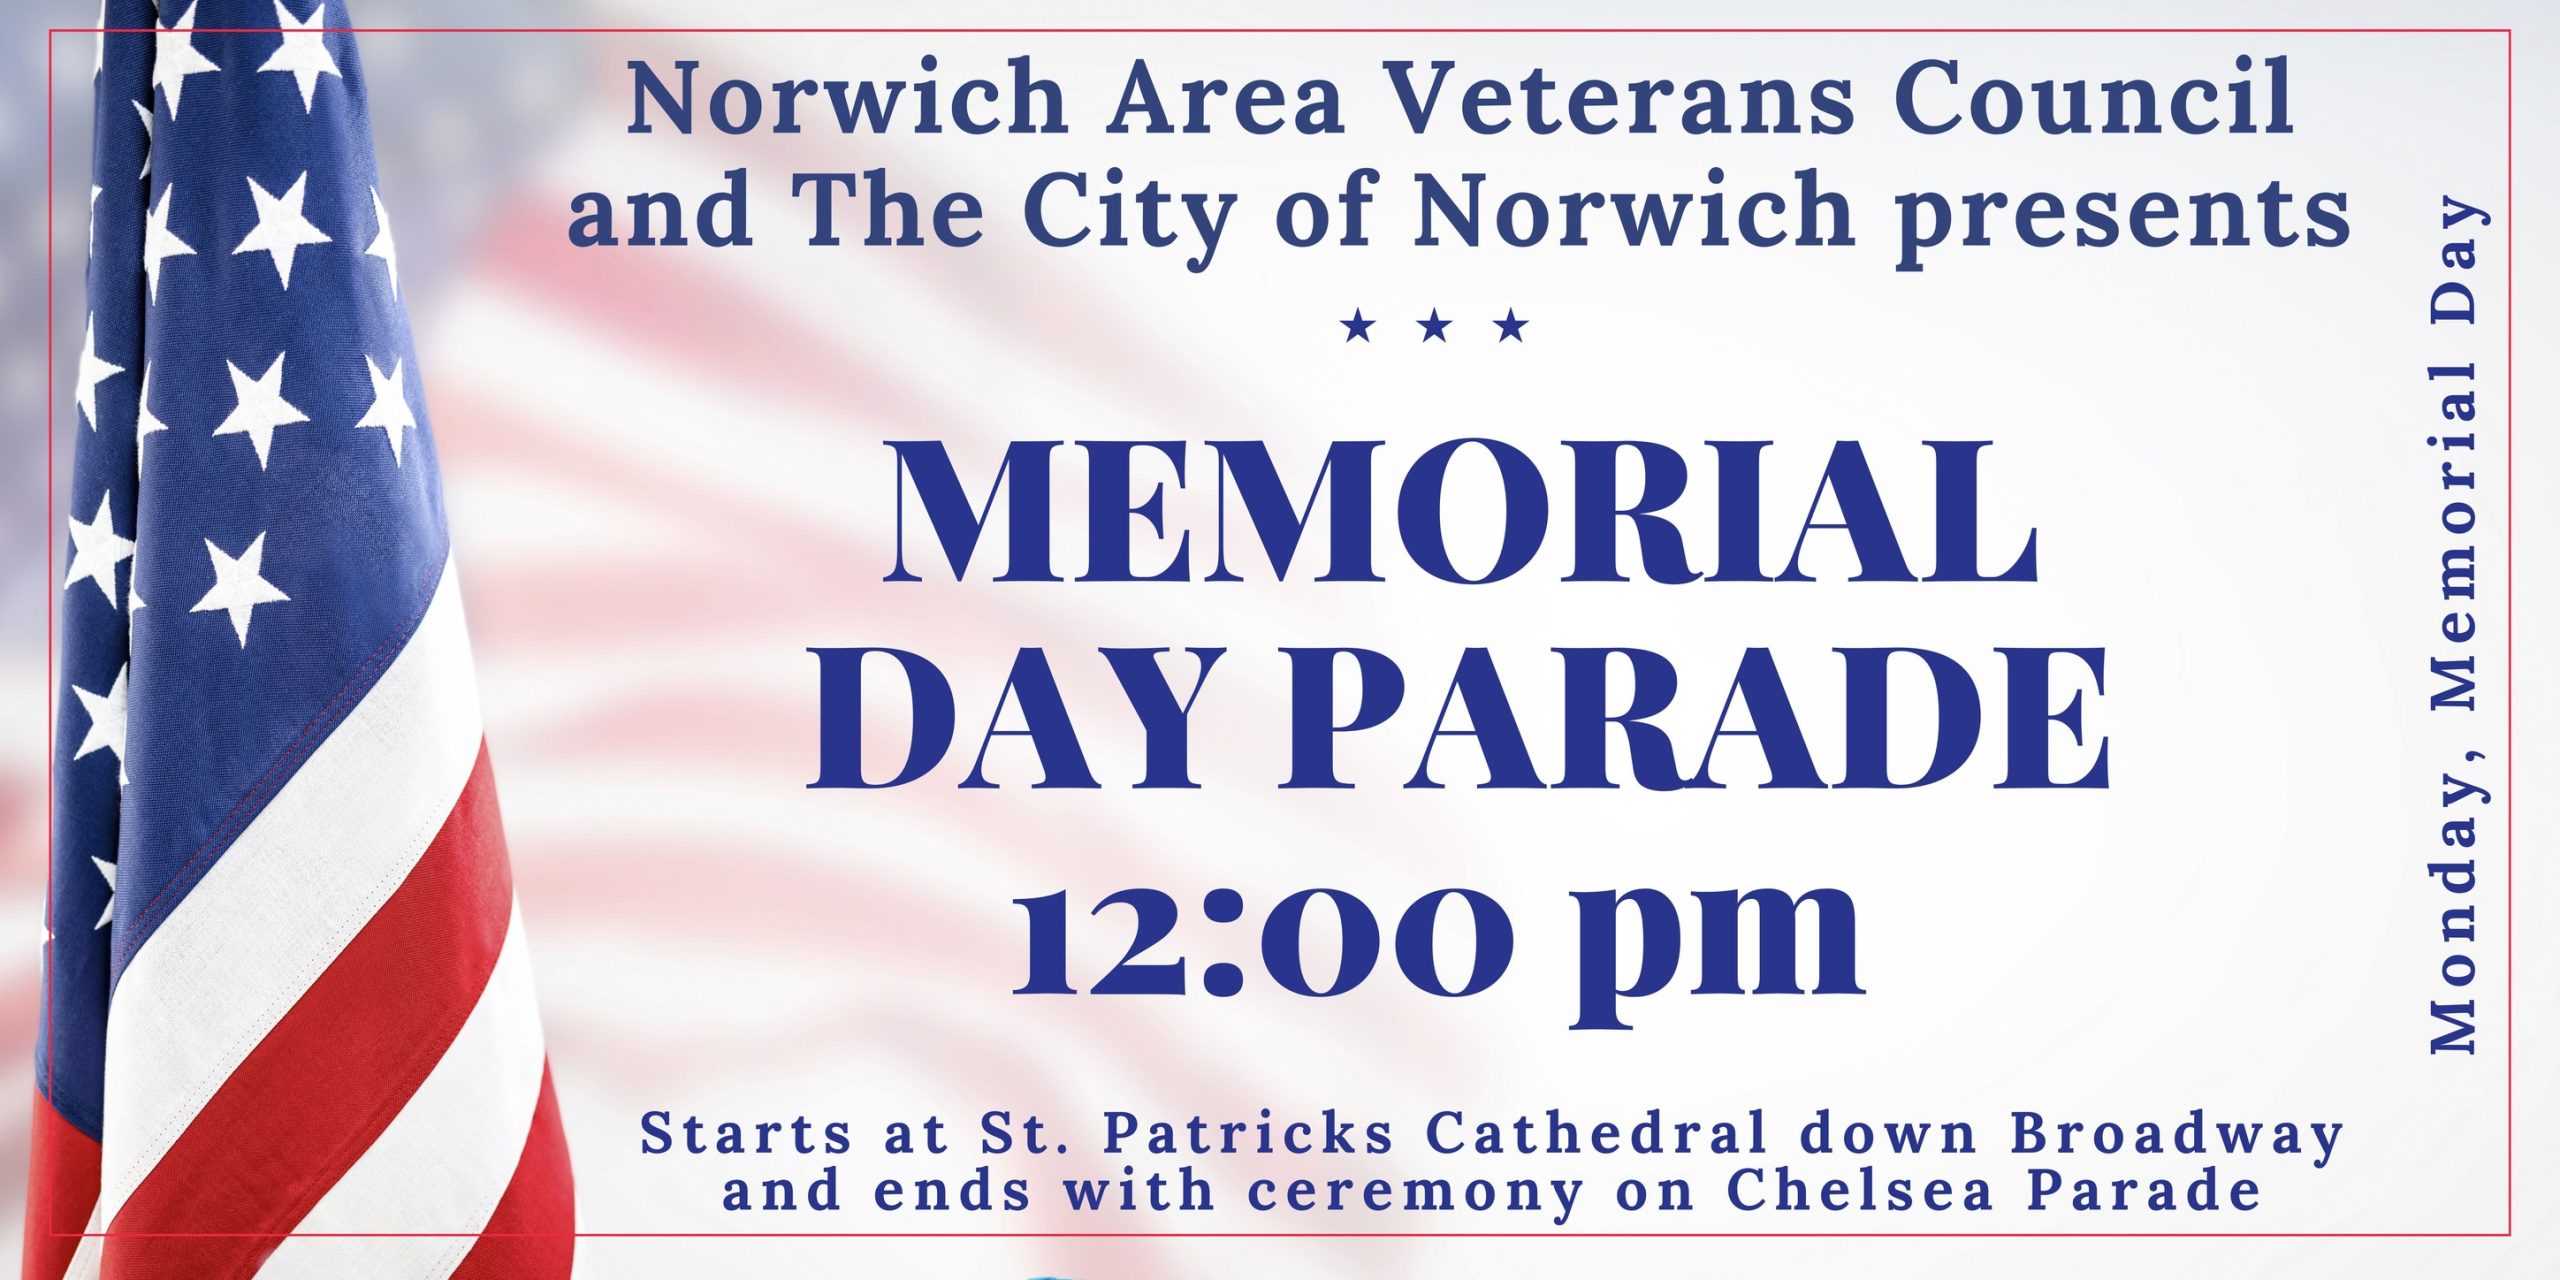 Annual Memorial Day Parade Chelsea Parade Historic District Norwich